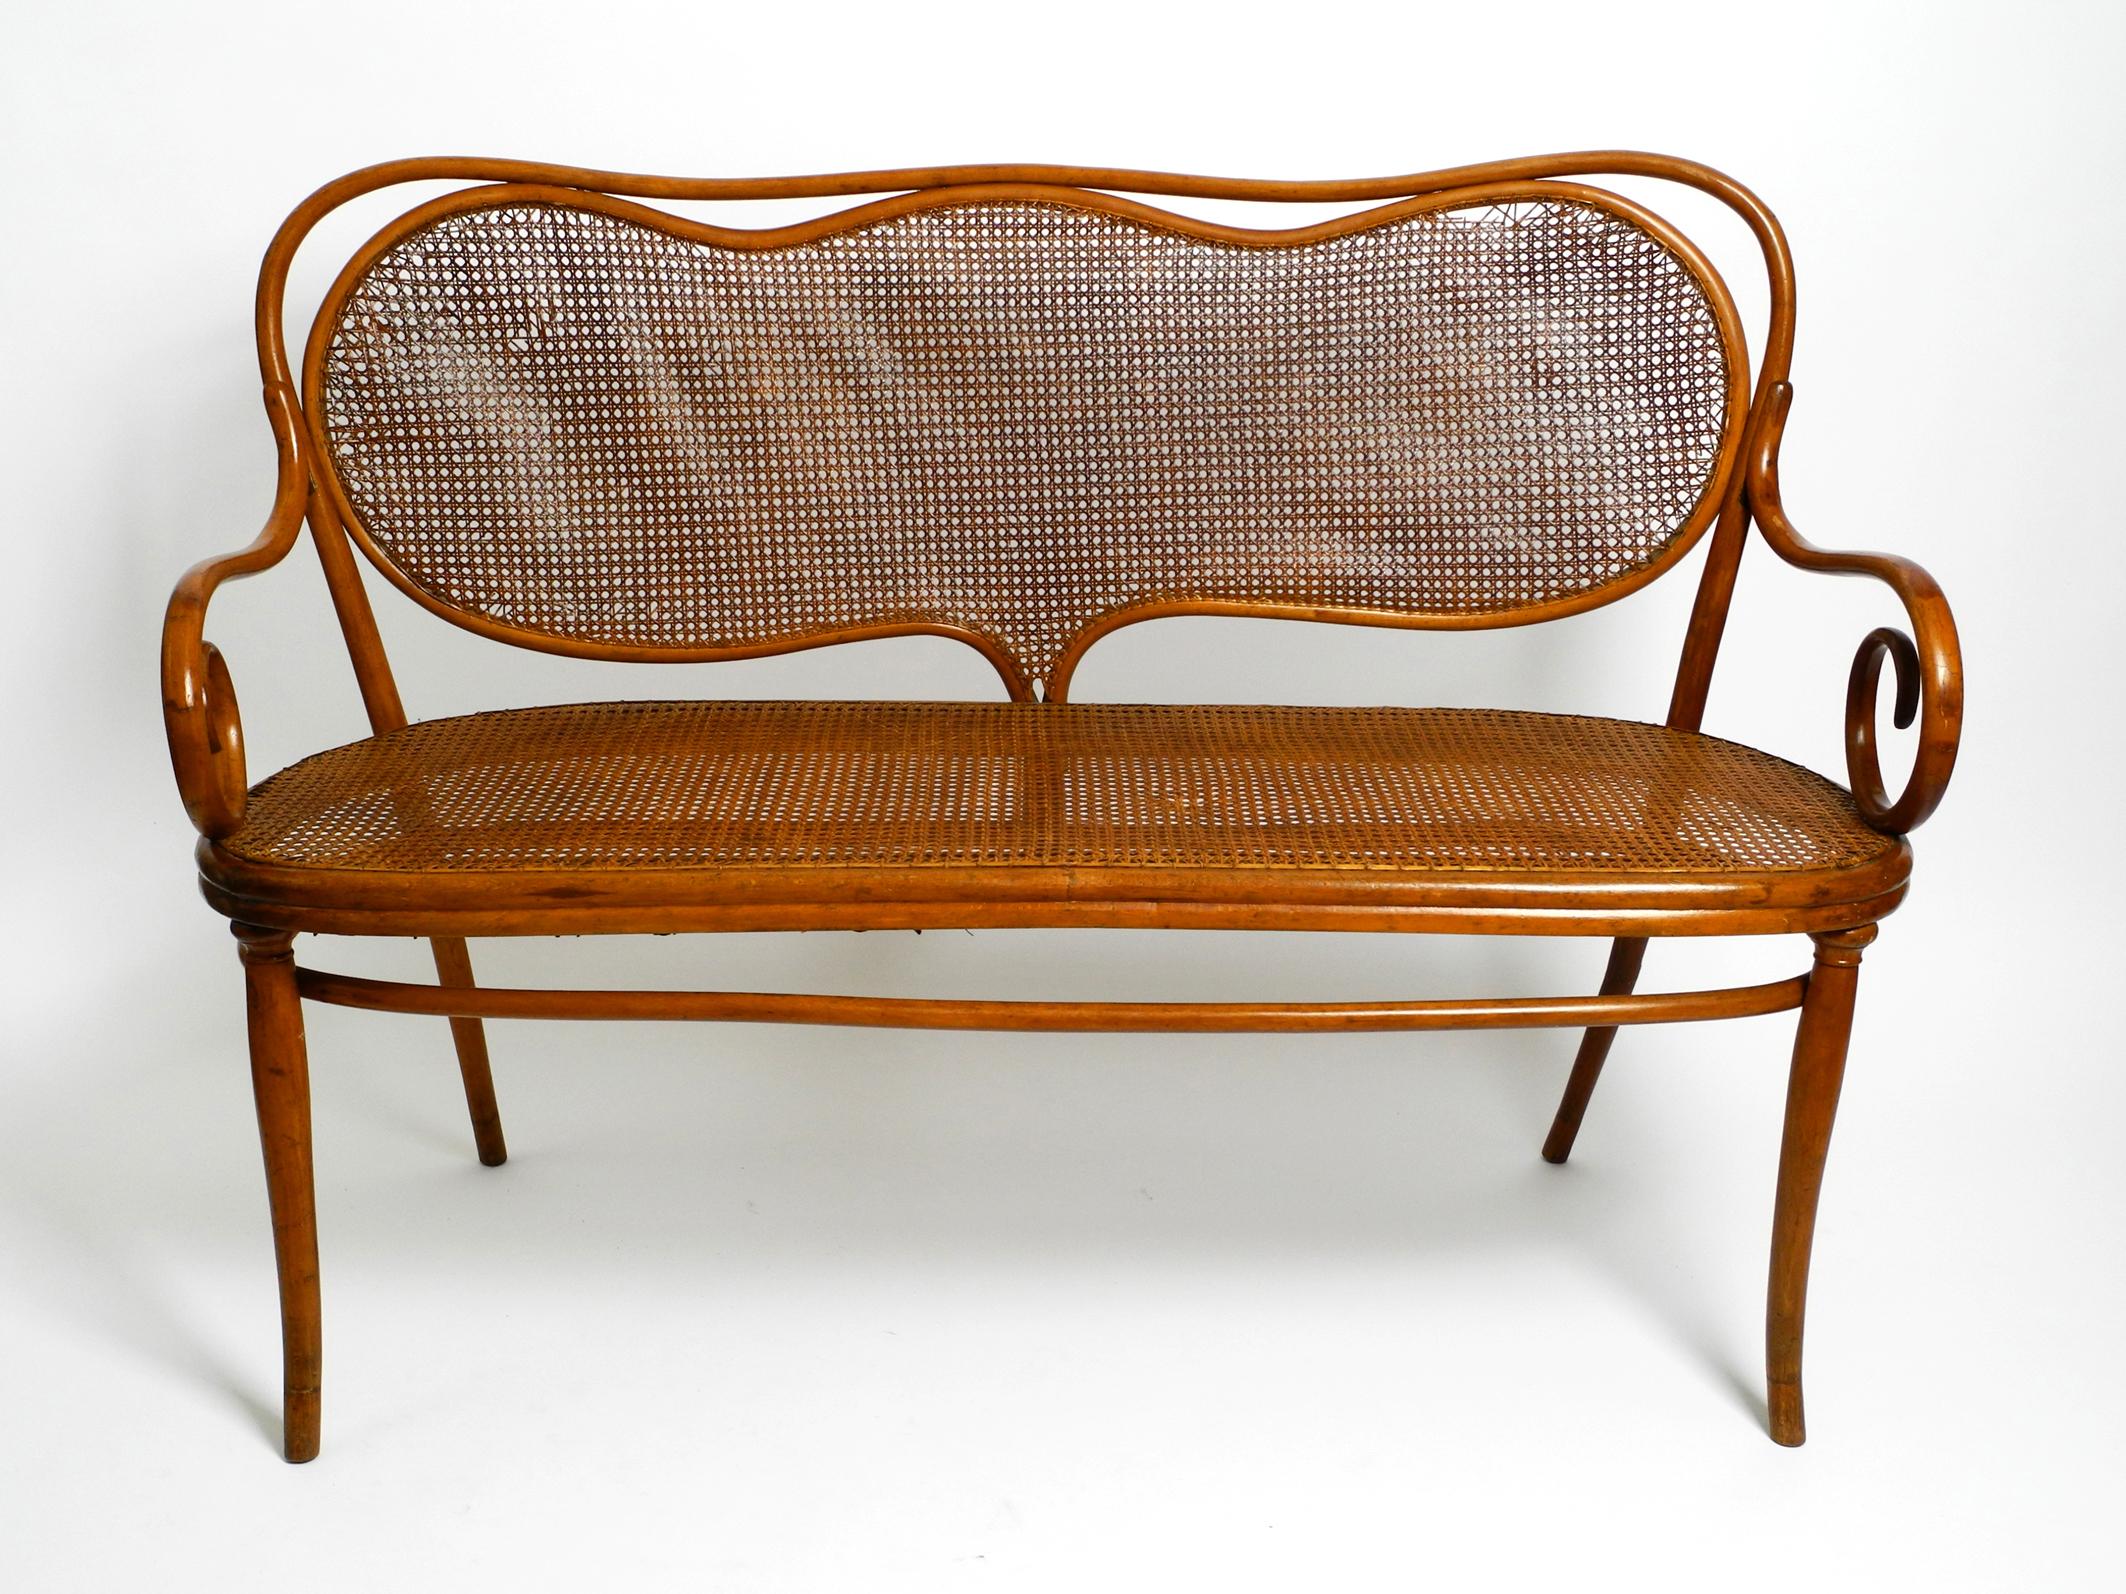 Beautiful, very rare original bench no. 5 by the Thonet brothers (Gebrüder Thonet) Vienna from 1859. Vienna Secession. Art Nouveau
With original branded logo and one original paper label on the bottom.
Made from bent beech with stripe glaze and